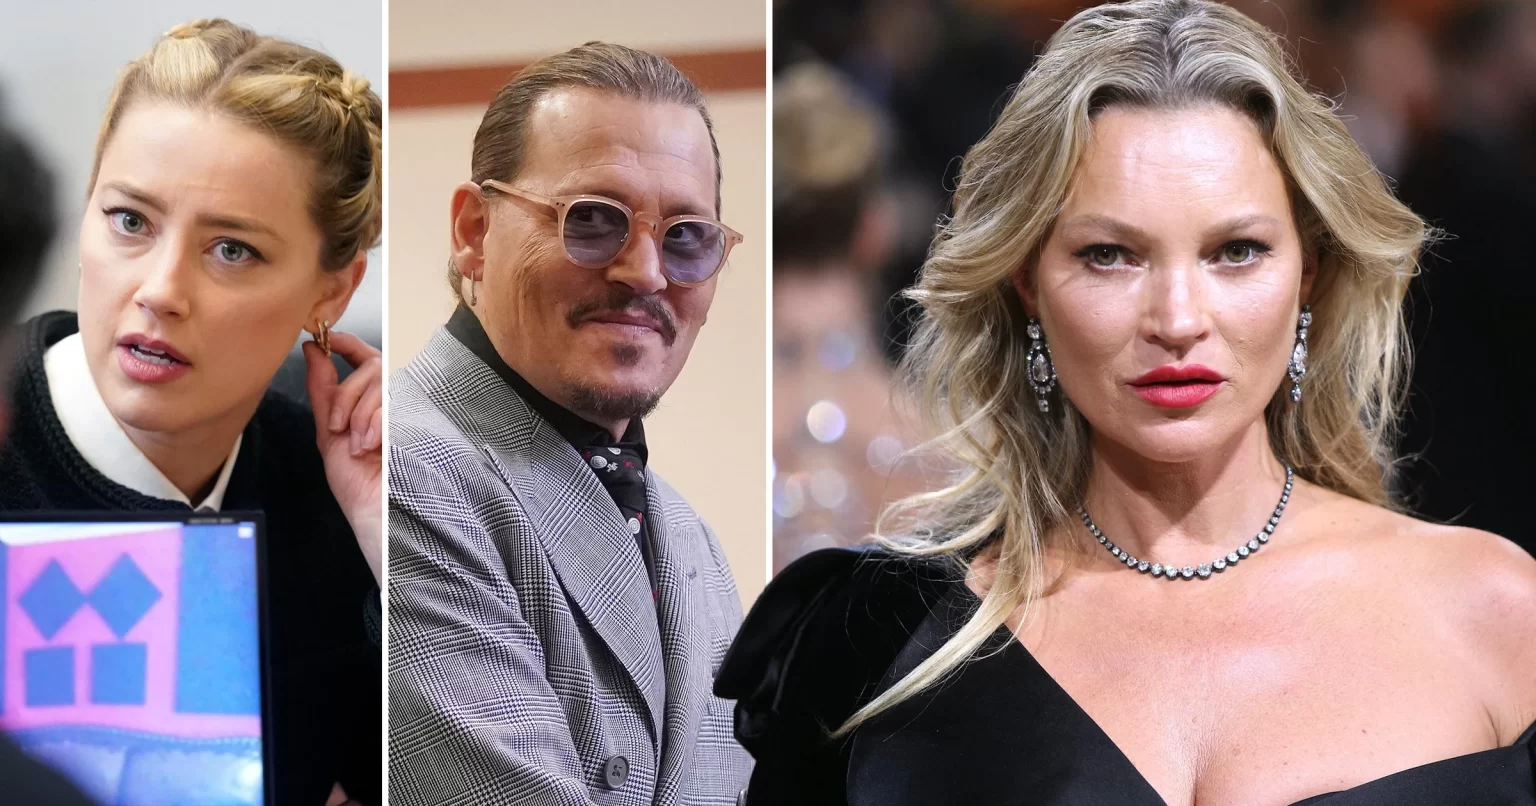 Kate Moss watches Johnny Depp perform with Jeff Beck in London days after testifying in Amber Heard trial